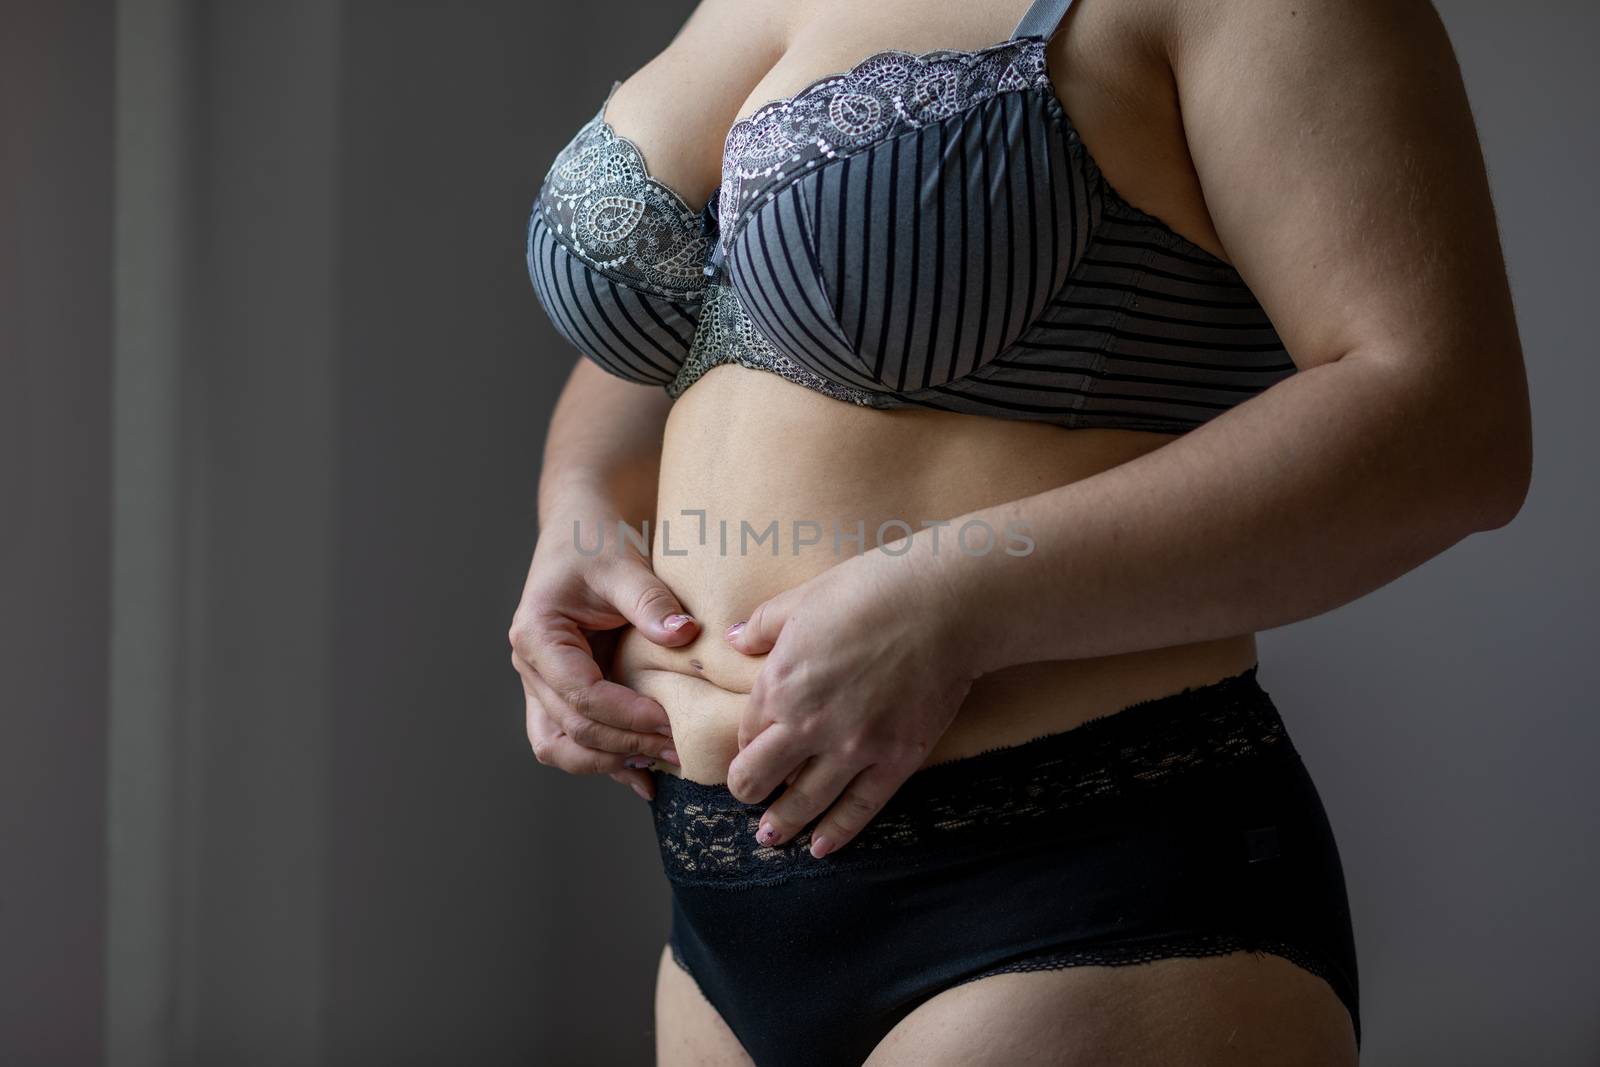 Woman Real Body Plus size Model in lingerie posign and touching fat on stomach, imperfect nonideal